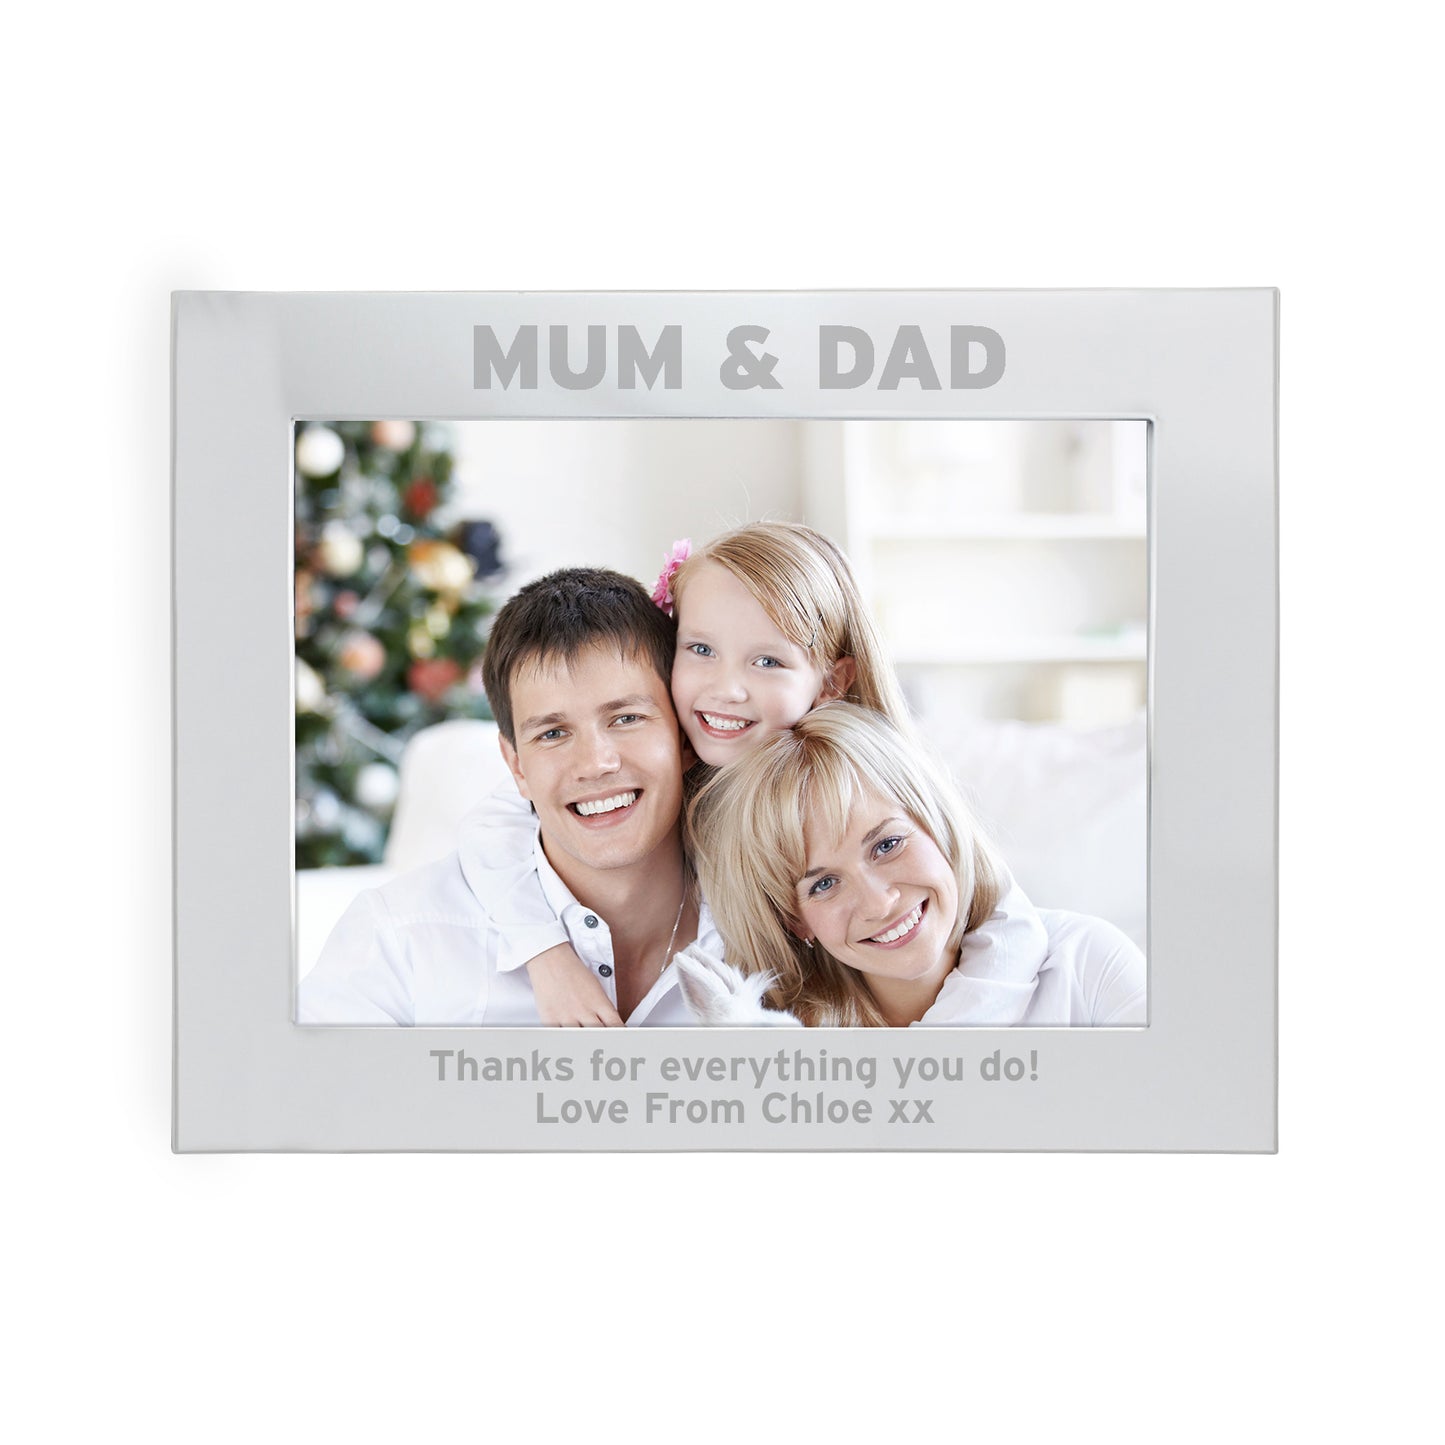 Personalised Silver 7x5 Mum & Dad Photo Frame - Personalise It!